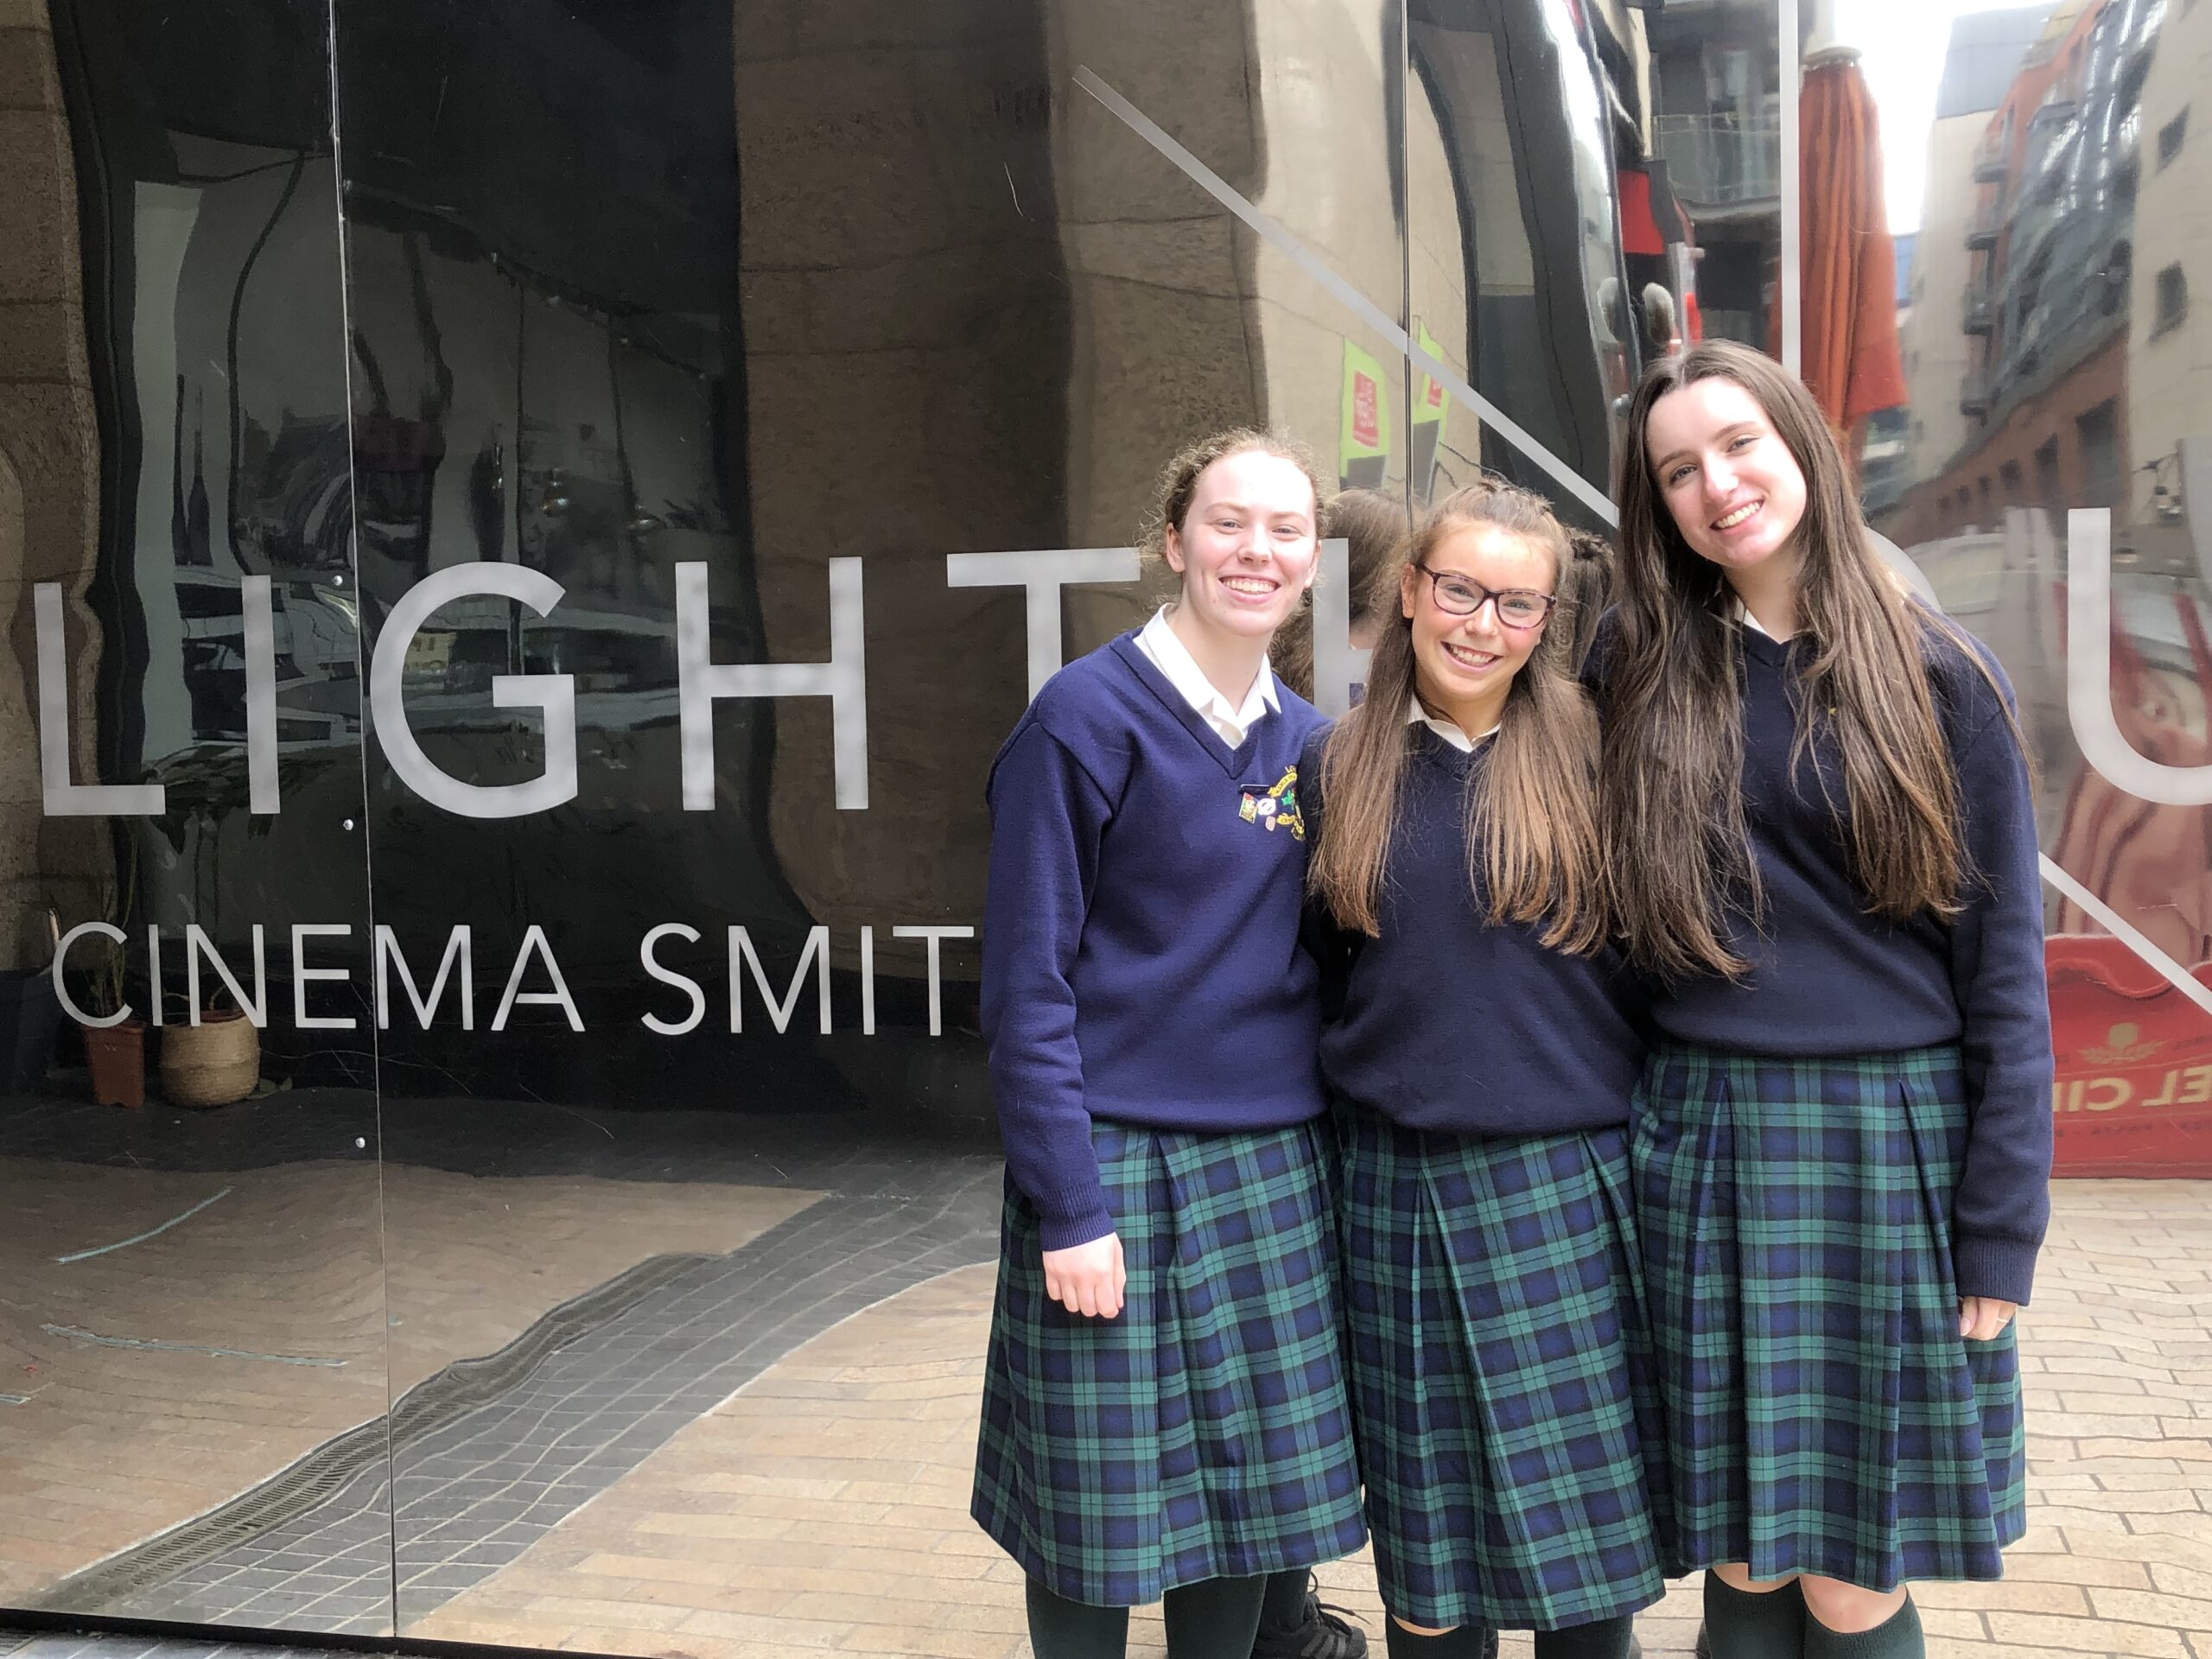 Fifth years’ Documentary screened at the Lighthouse cinema in Smithfield.